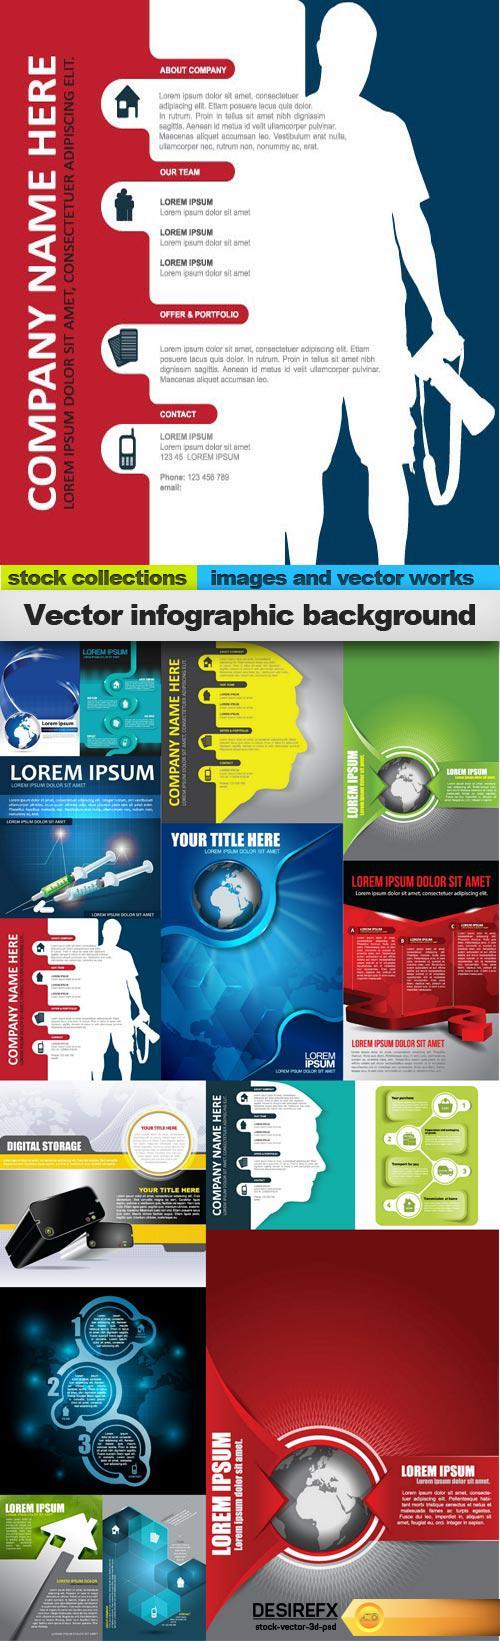 Vector infographic background, 15 x EPS